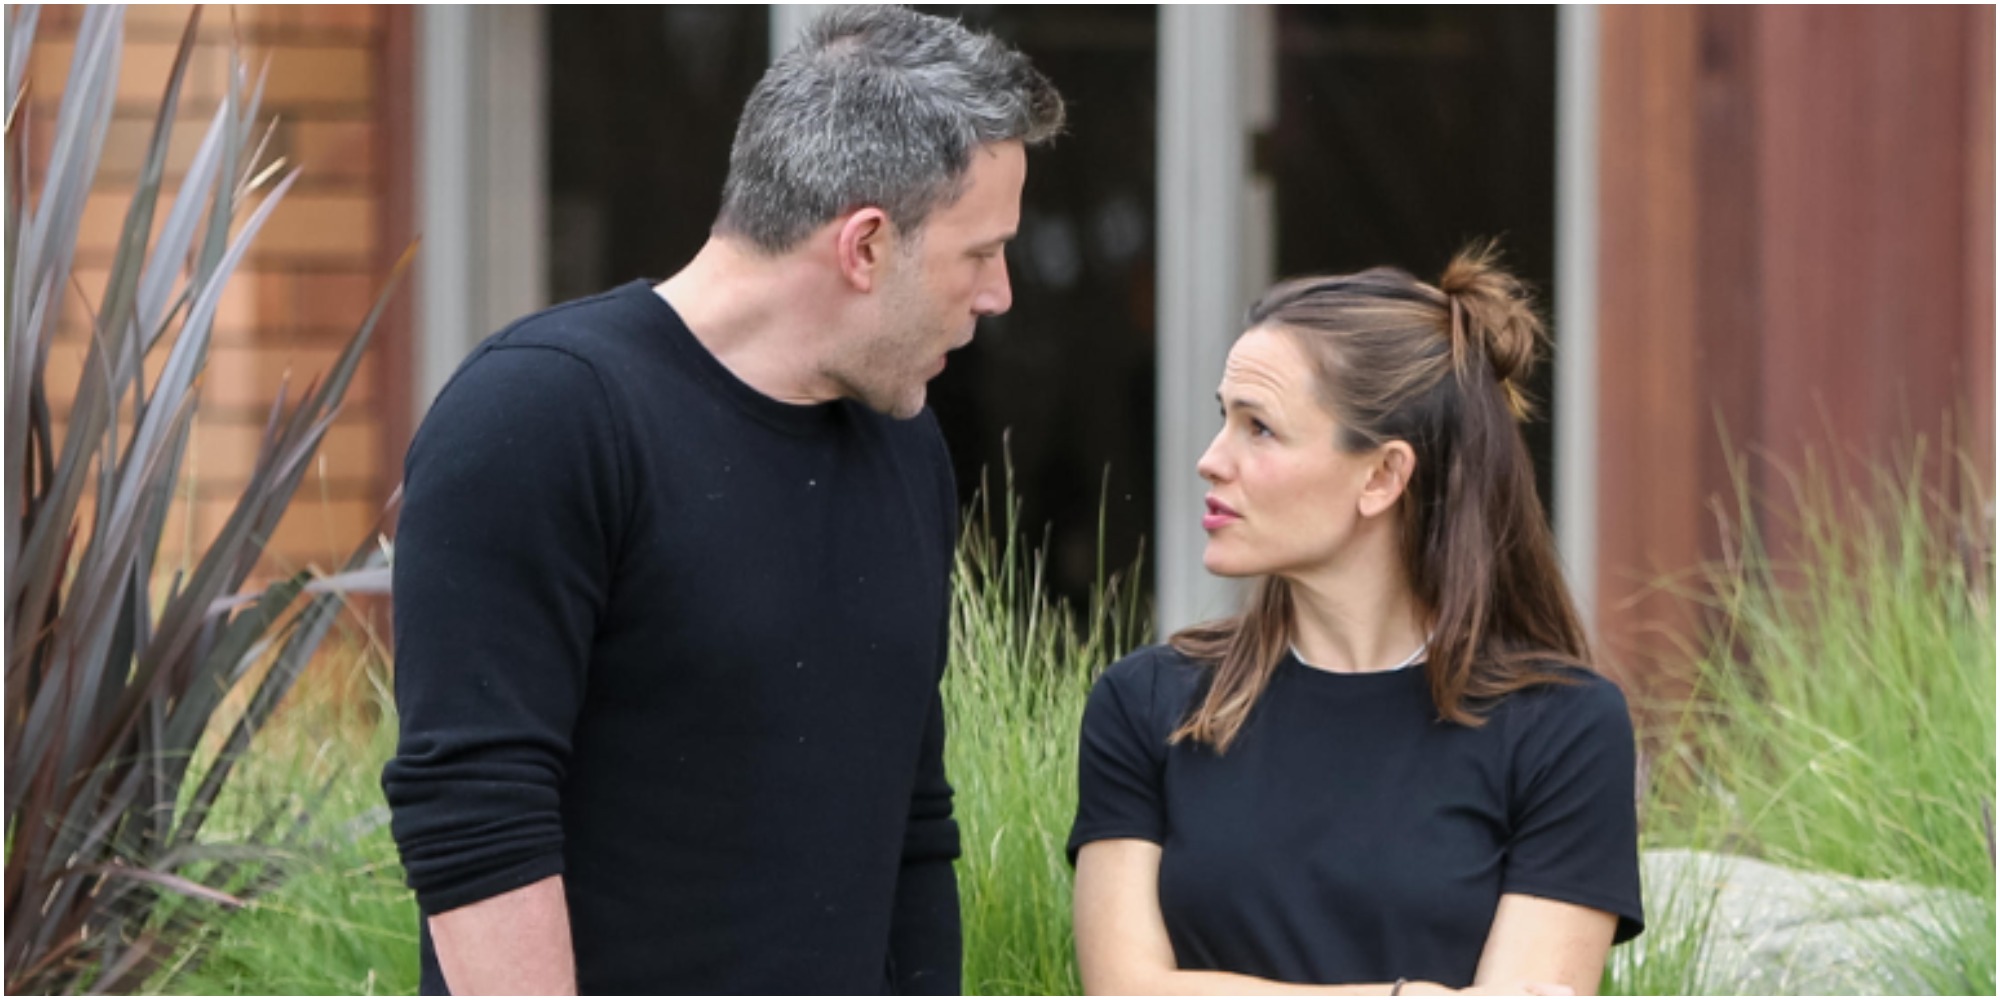 Jennifer Garner and Ben Affleck are seen on February 27, 2020 in Los Angeles, California.